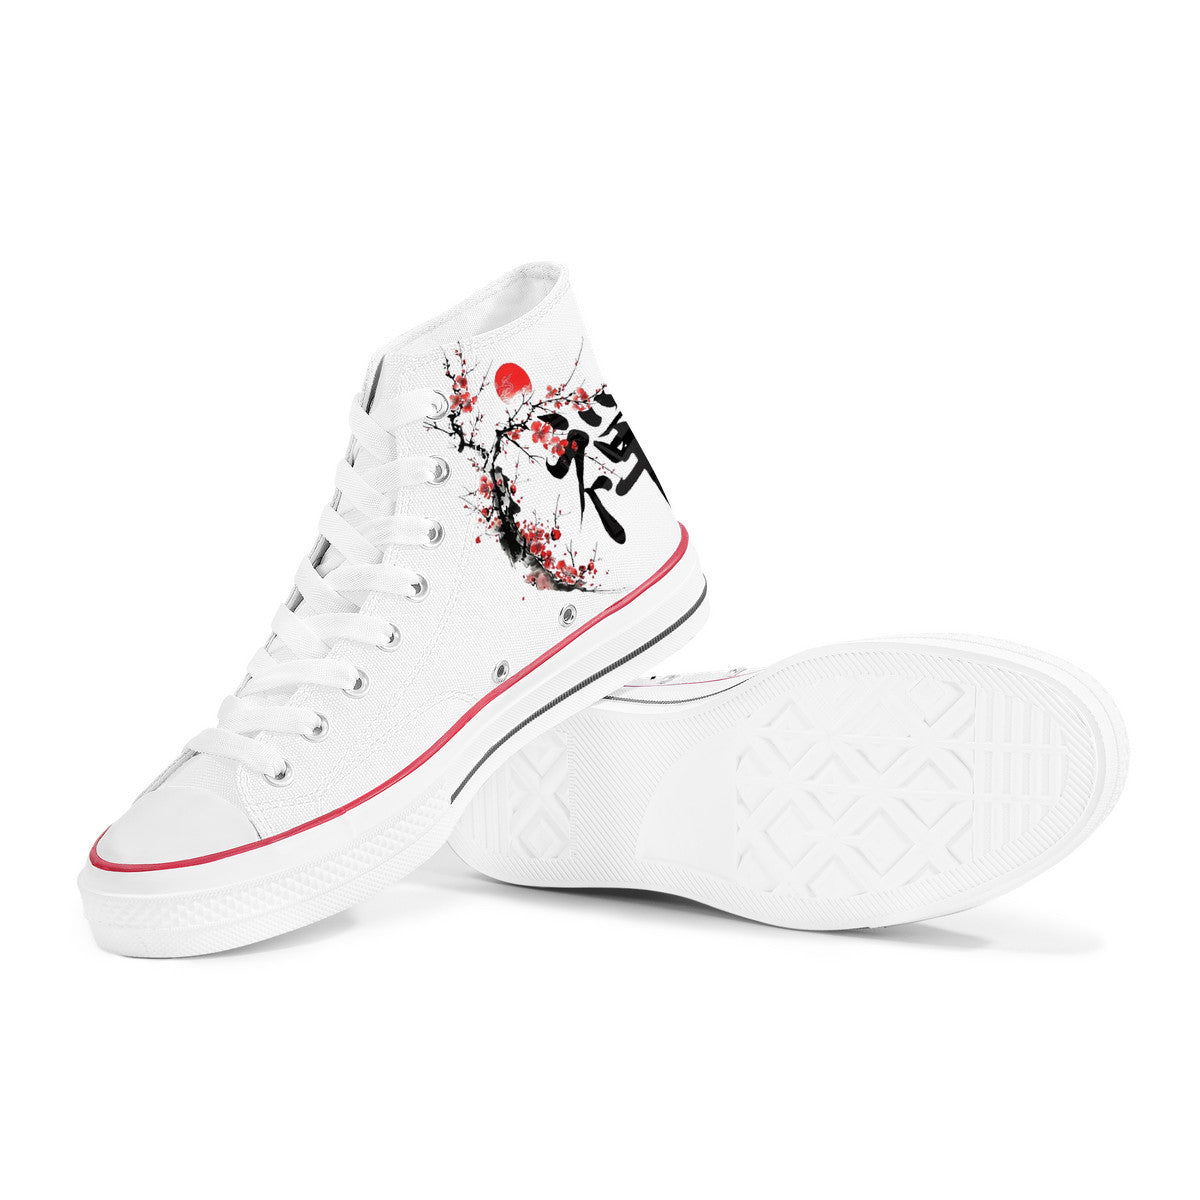 High Top Canvas Shoes - Japanese tattoo design 